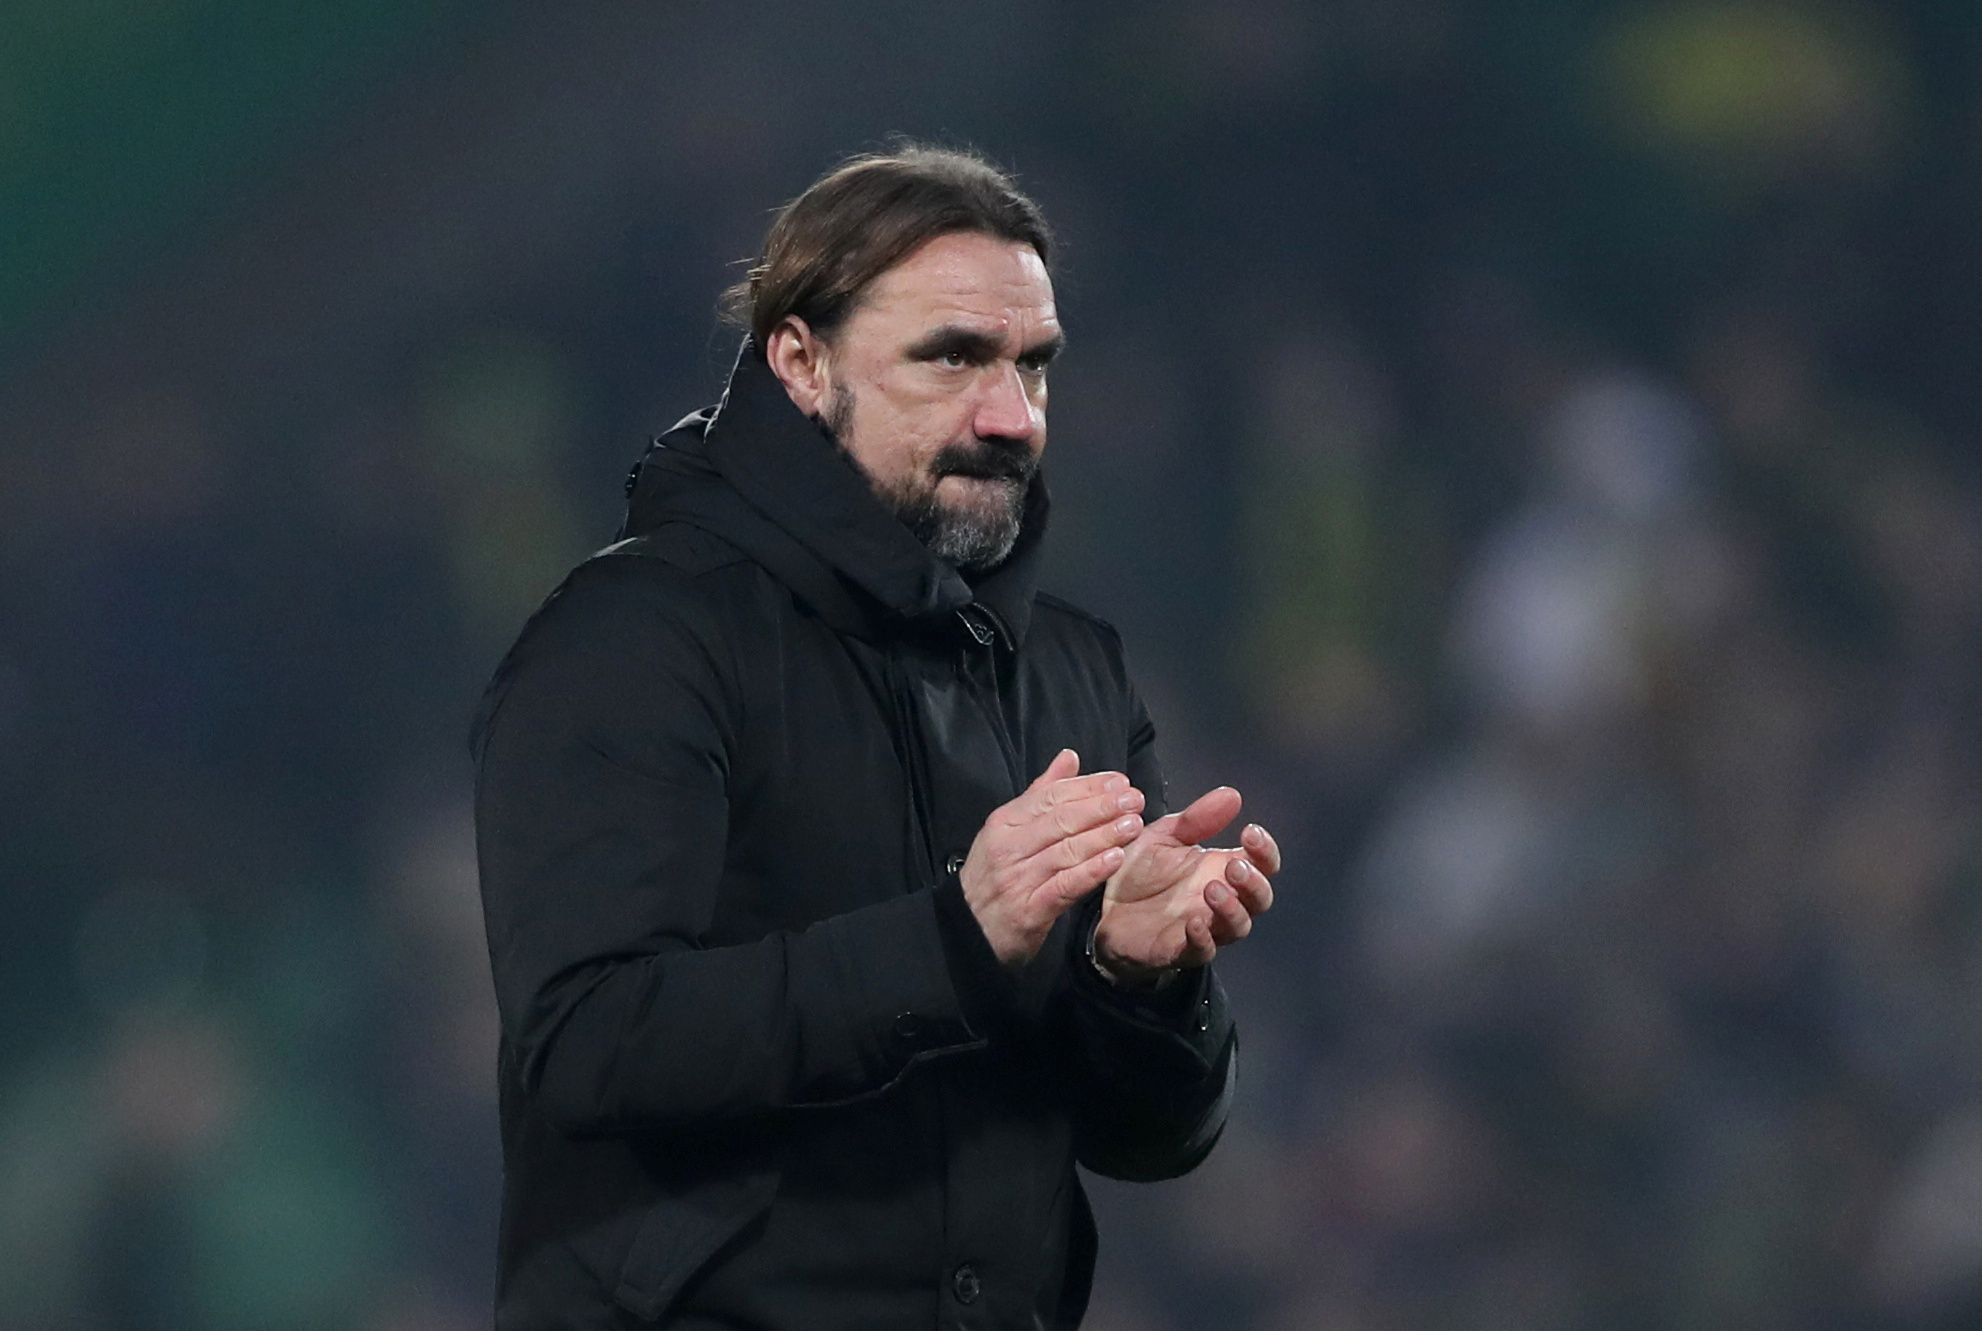 Soccer Football - Premier League - Norwich City v Crystal Palace - Carrow Road, Norwich, Britain - January 1, 2020  Norwich City manager Daniel Farke applauds fans after the match   Action Images via Reuters/Peter Cziborra  EDITORIAL USE ONLY. No use with unauthorized audio, video, data, fixture lists, club/league logos or 